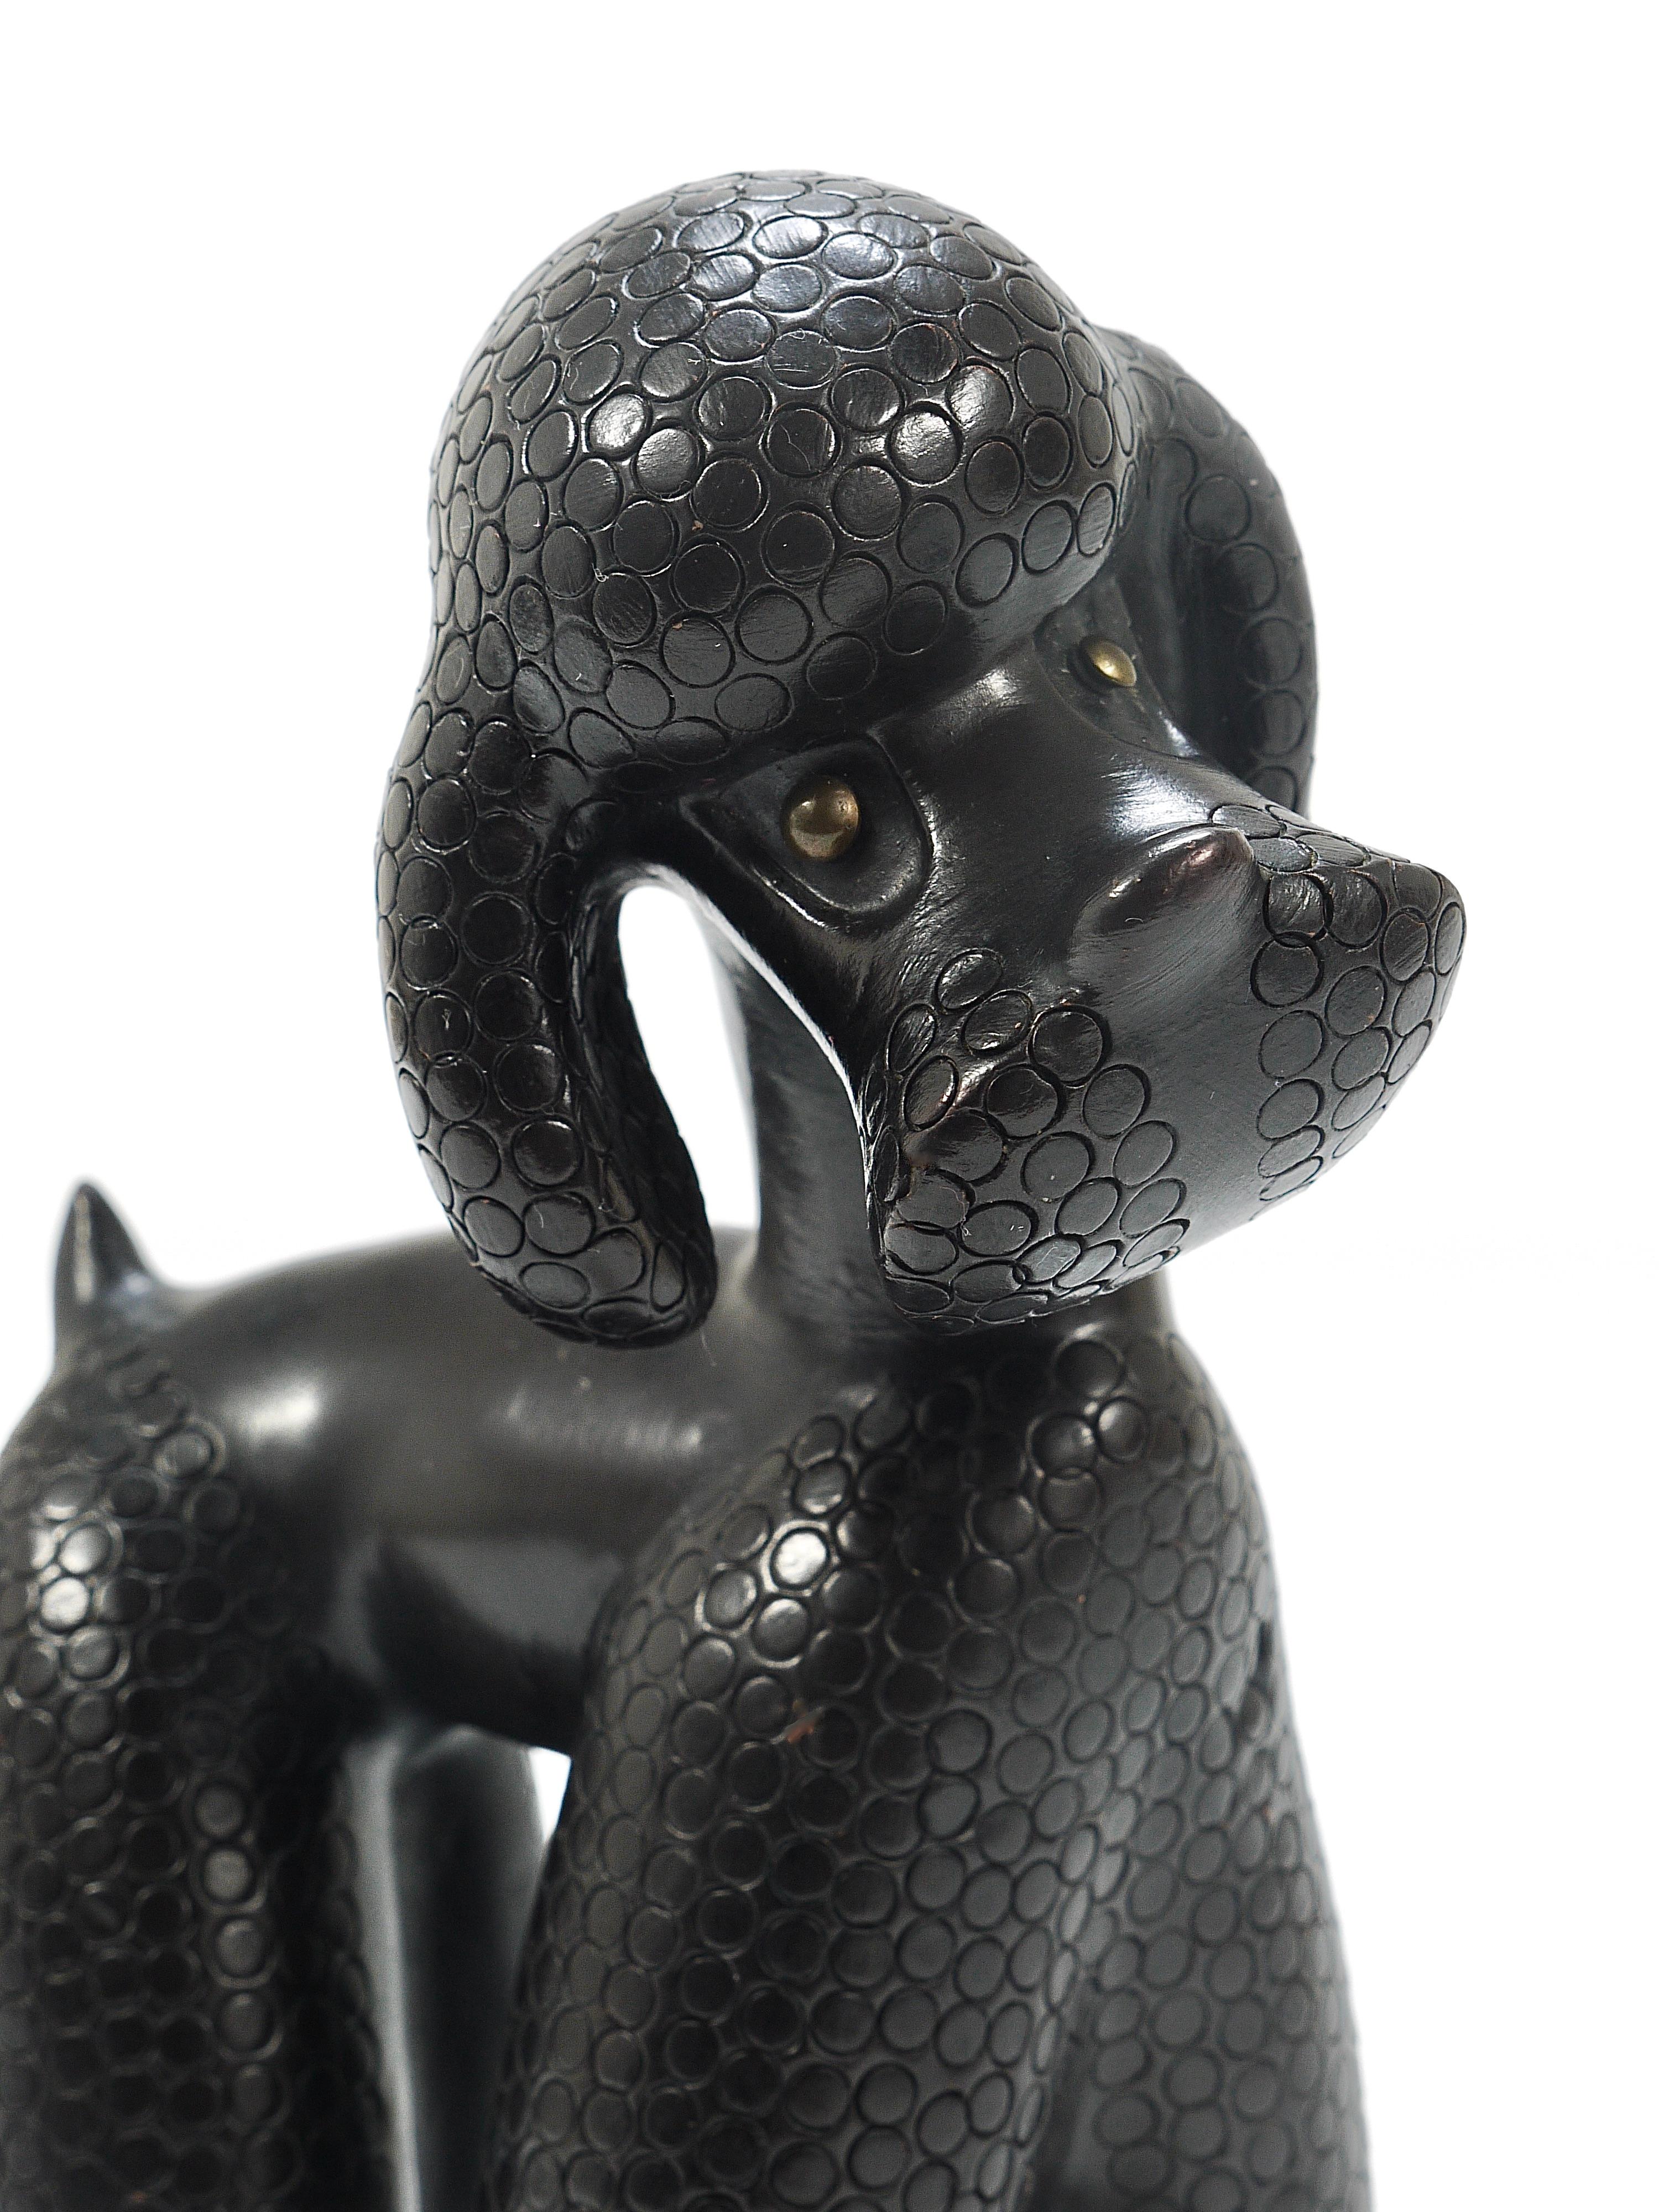 Charming Dog Poodle Sculpture Figurine by Leopold Anzengruber, Austria, 1950s 2